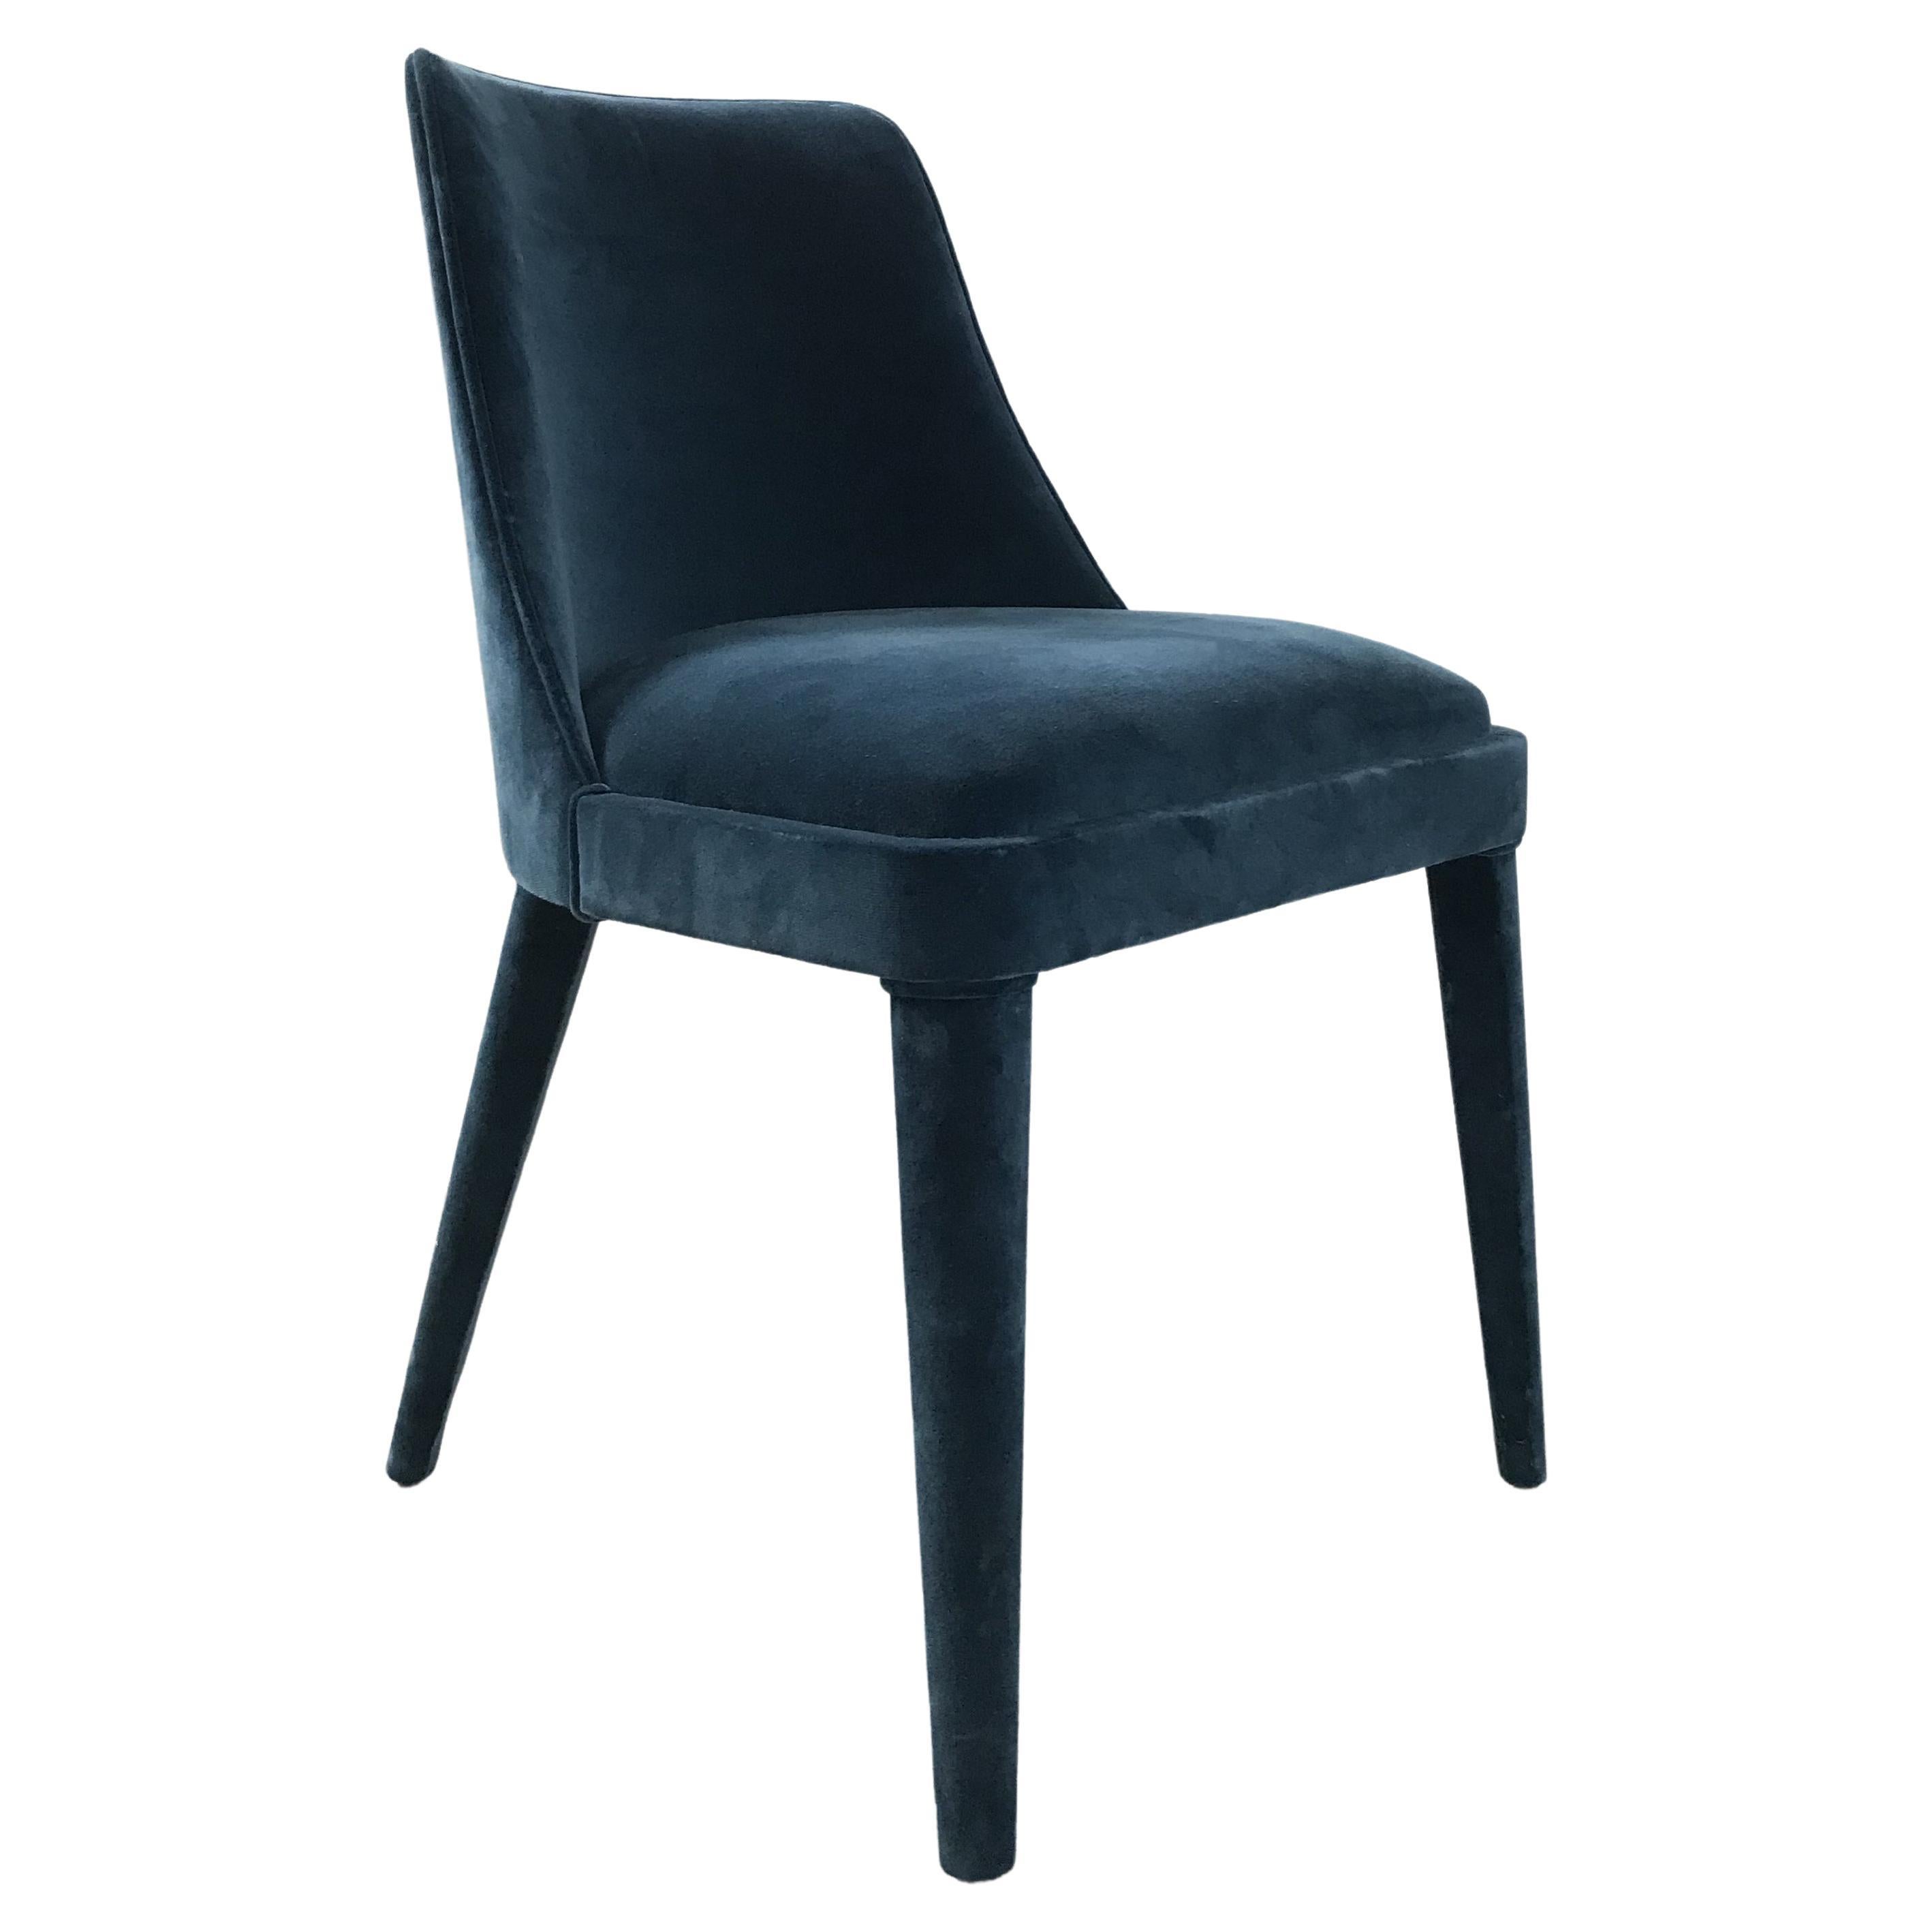 Lola, the Classic and Super Comfortable Padded Chair For Sale